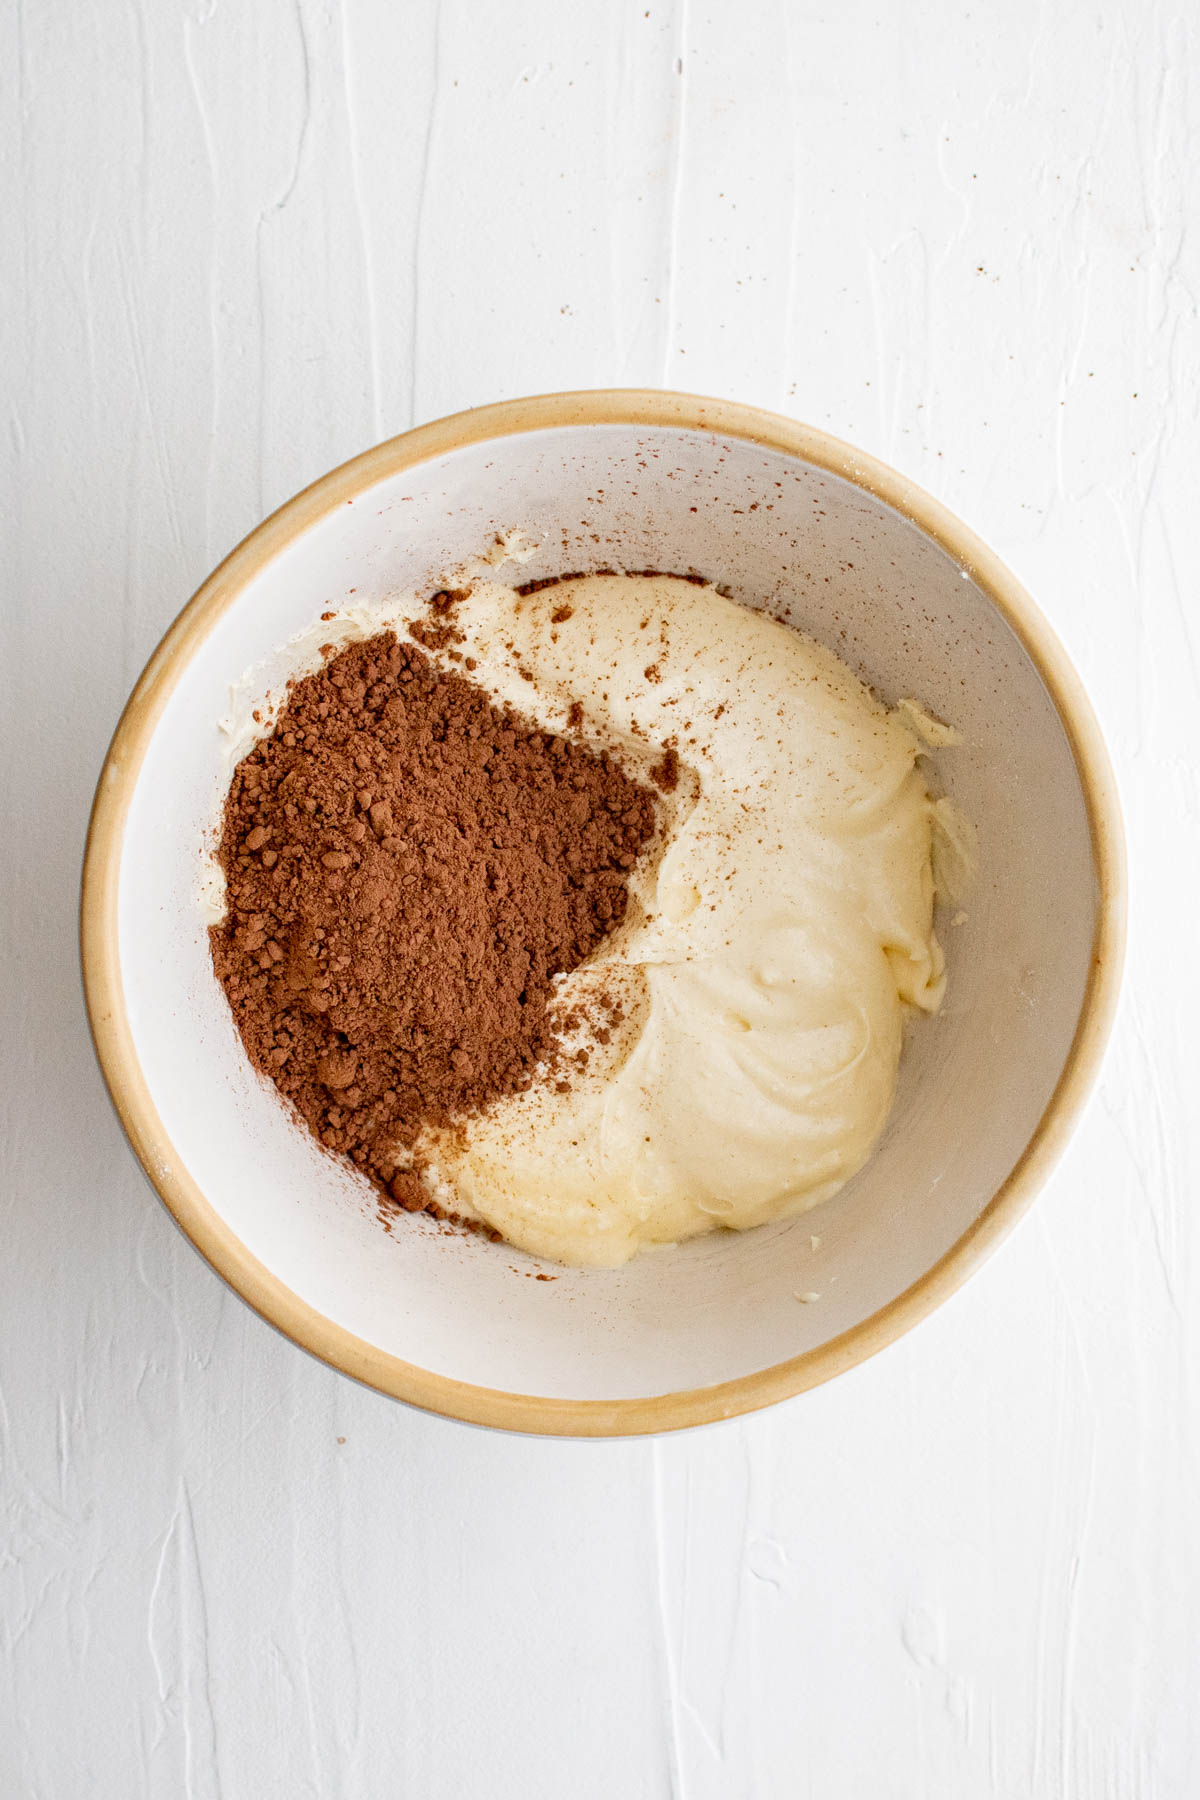 yellow cake batter with cocoa powder